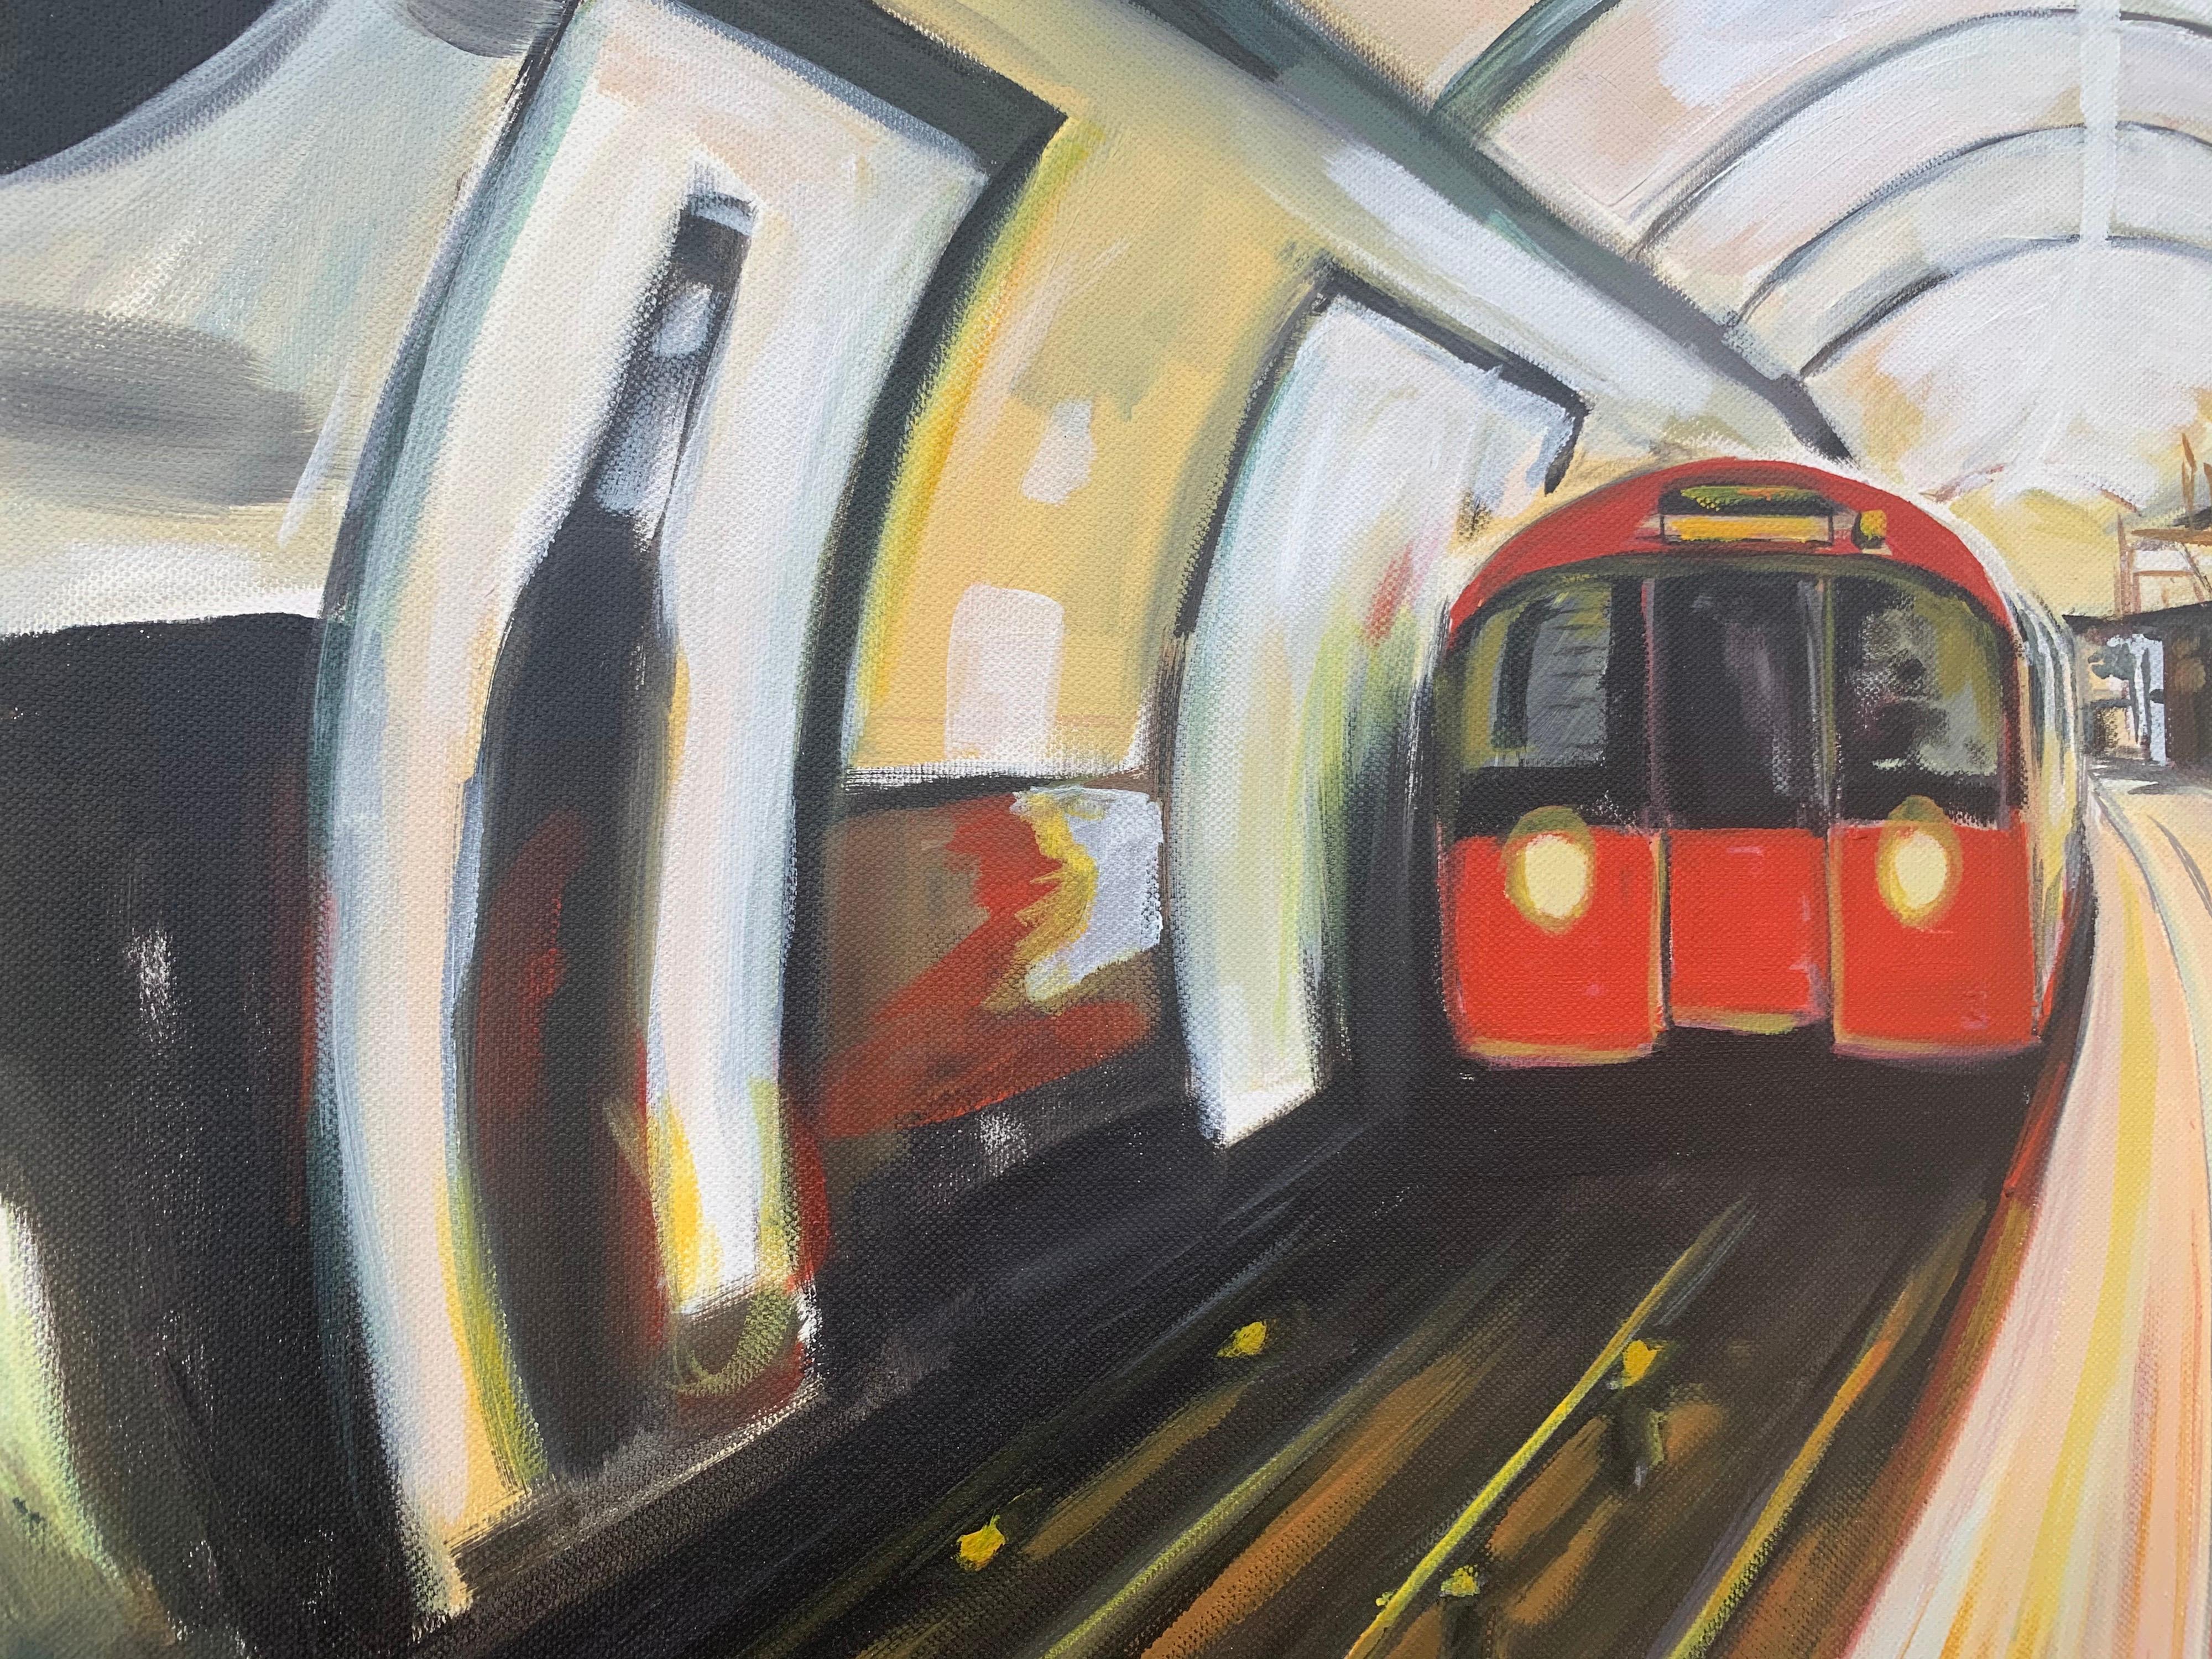 Original Painting of the London Underground by Leading Contemporary British Artist, Angela Wakefield 

Art measures 24 x 18 inches
Frame measure 27 x 21 inches 

Angela Wakefield has twice been on the front cover of ‘Art of England’ and featured in